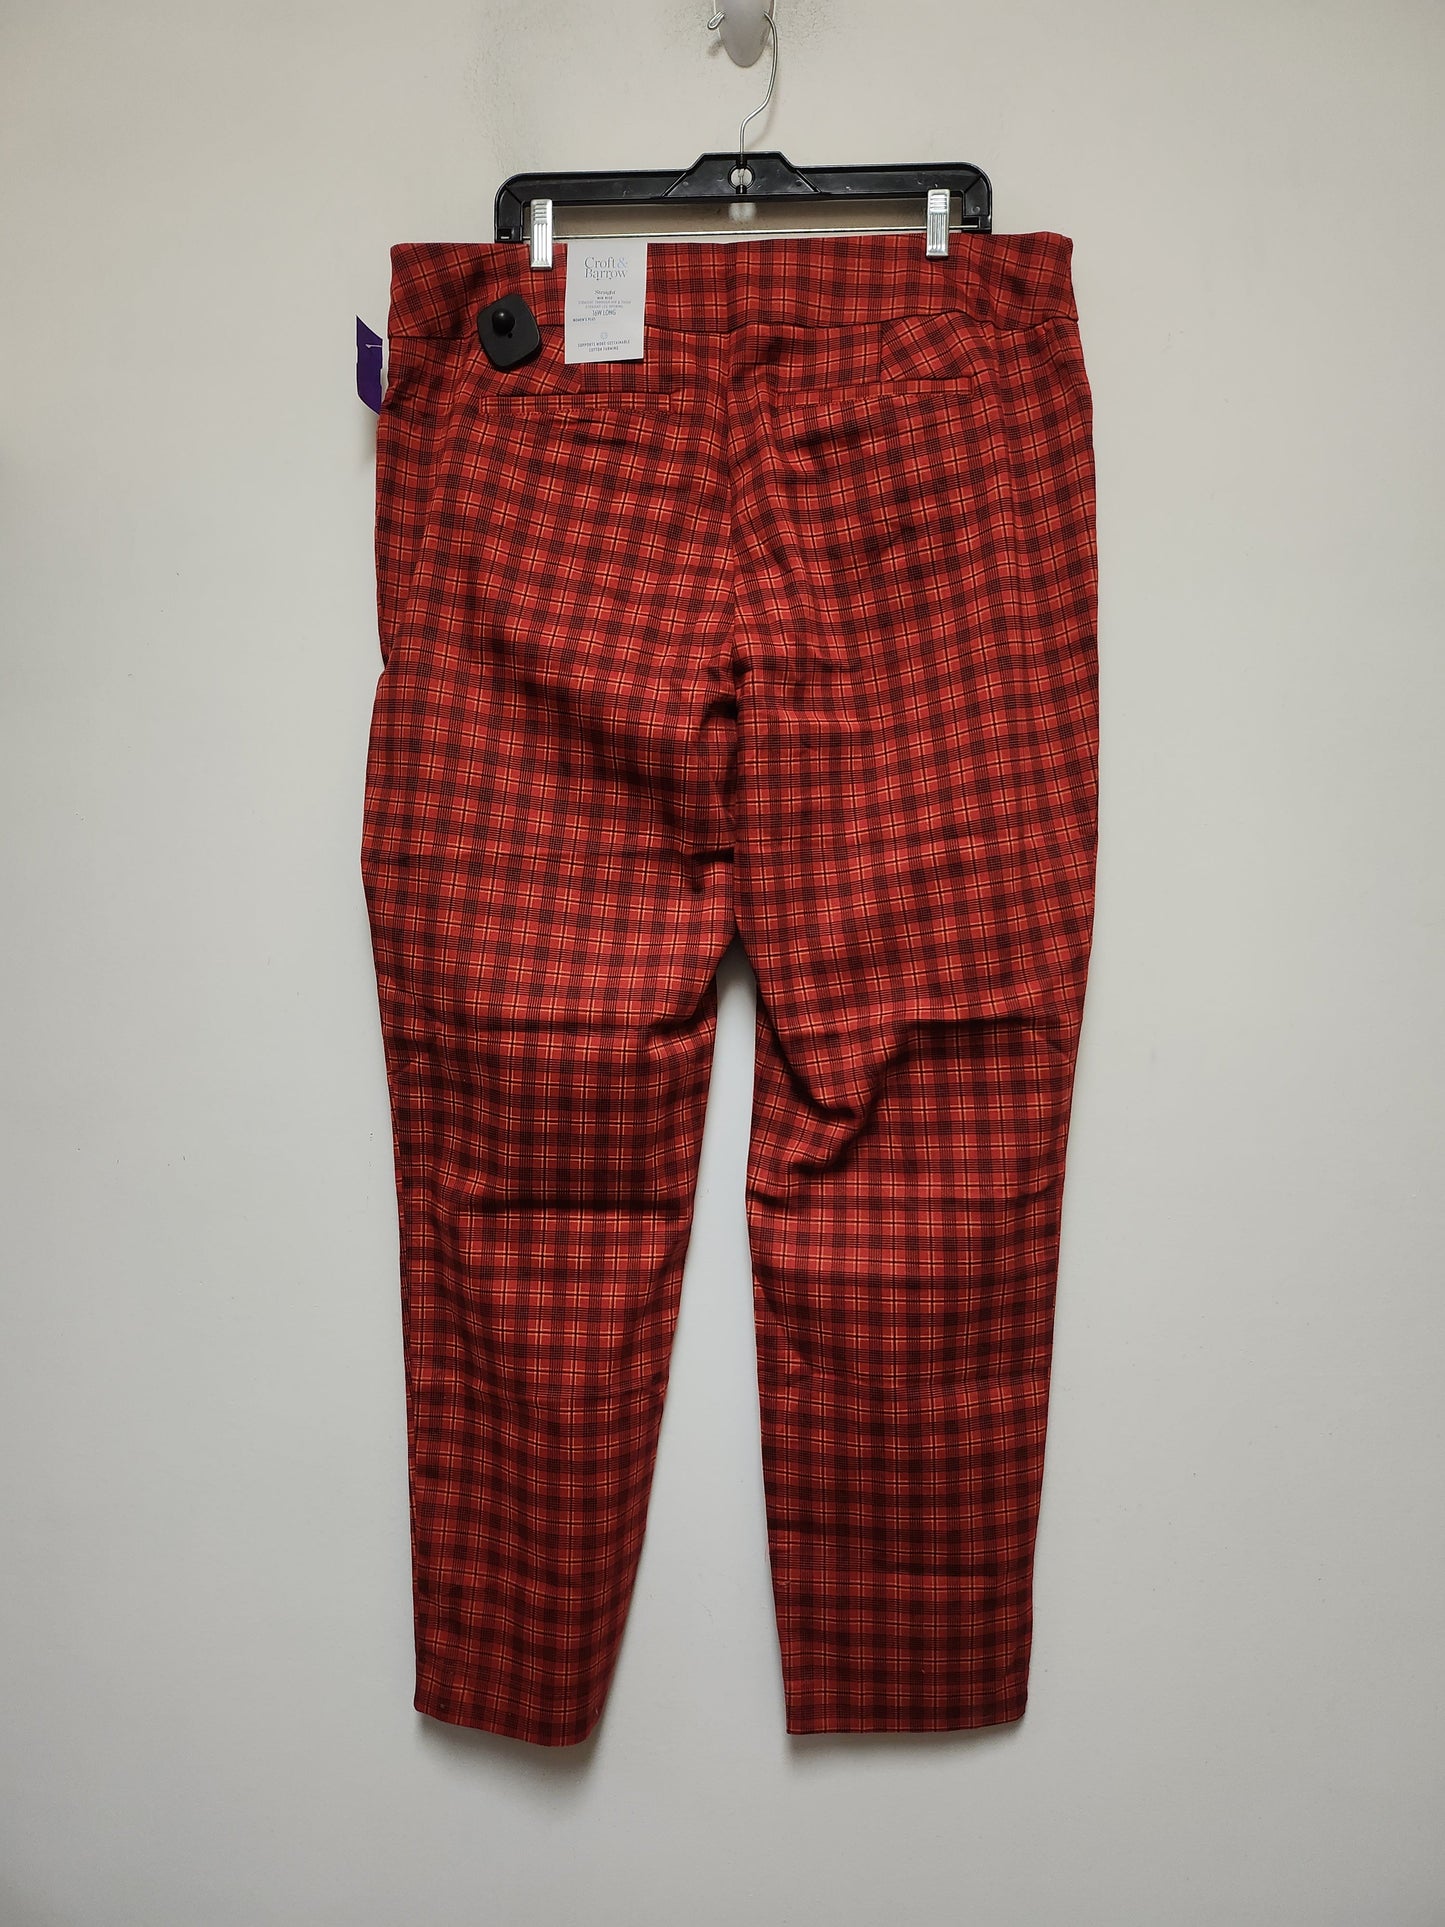 Plaid Pattern Pants Other Croft And Barrow, Size 16